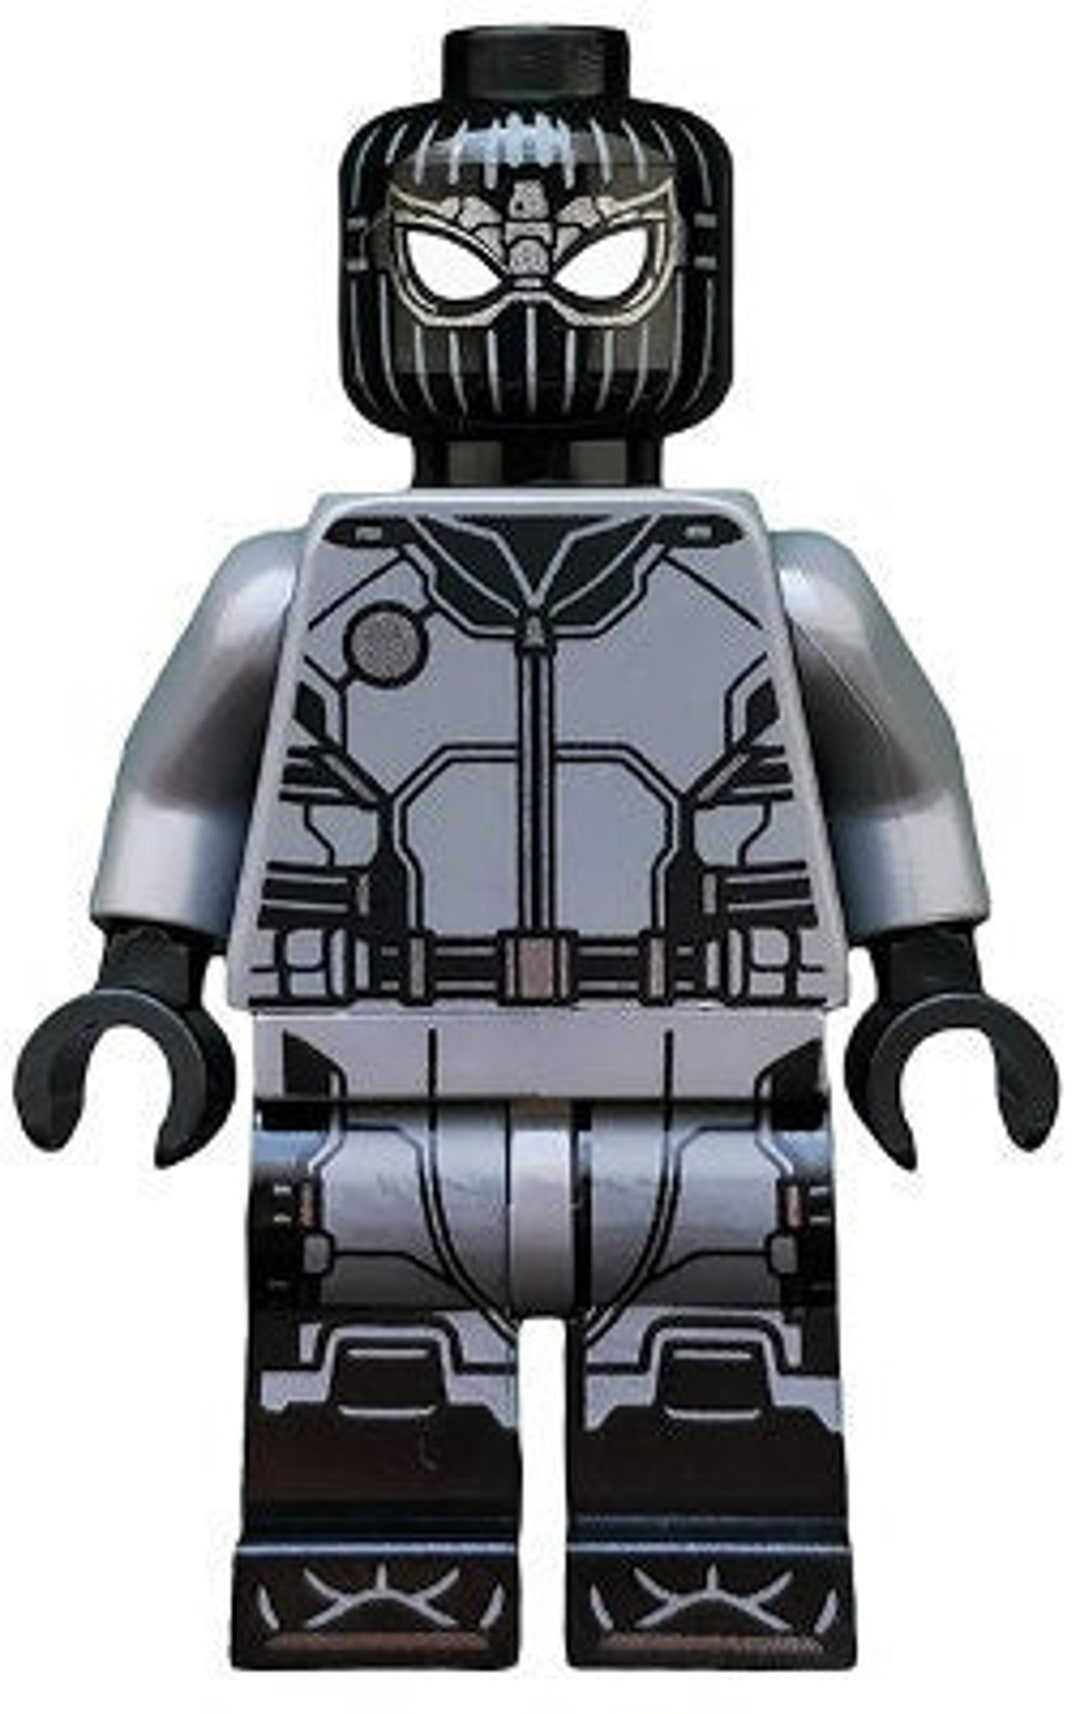 Lego MINIFIGURE Spider-man Black and Gray Suit stealth -